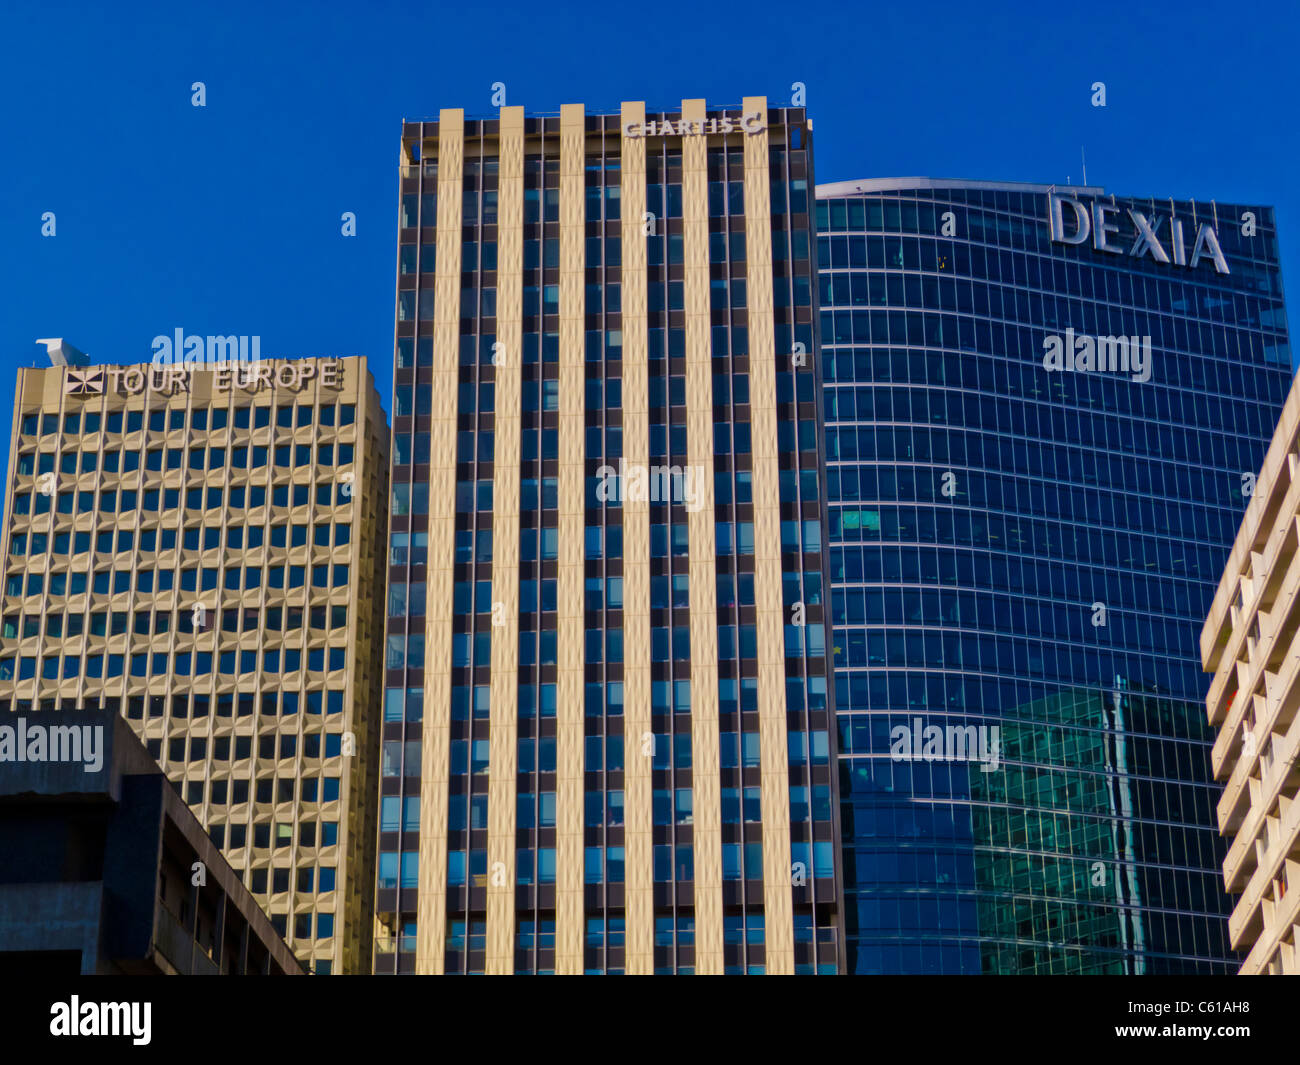 Paris-La Défense, France, Business Center, Views Modern Office Towers, French Companies Buildings, Dexia Bank Sign Stock Photo